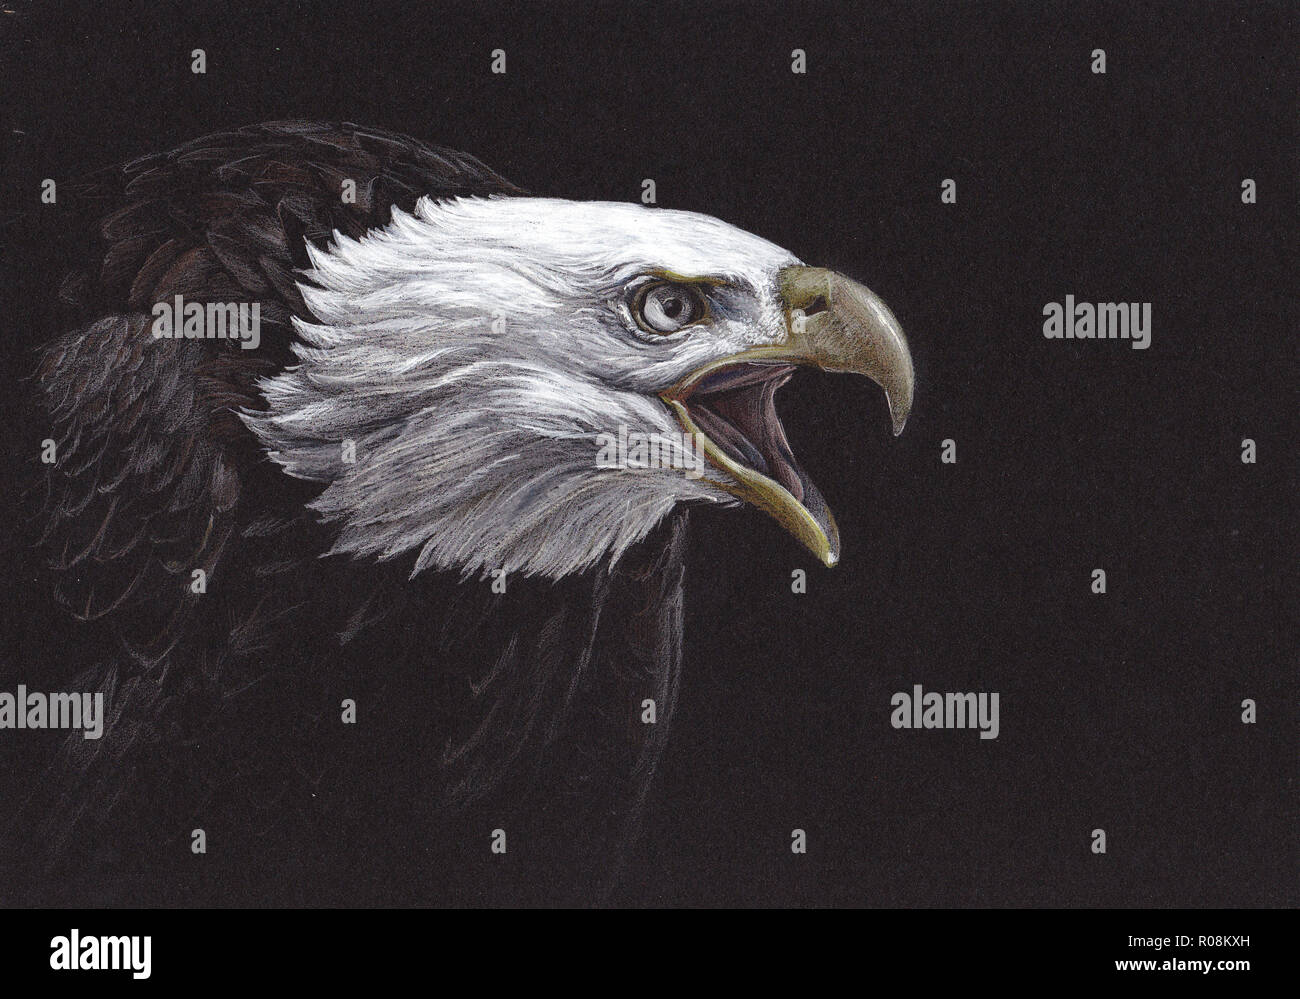 How To Draw A Bald Eagle (Hunting) | Step By Step - YouTube